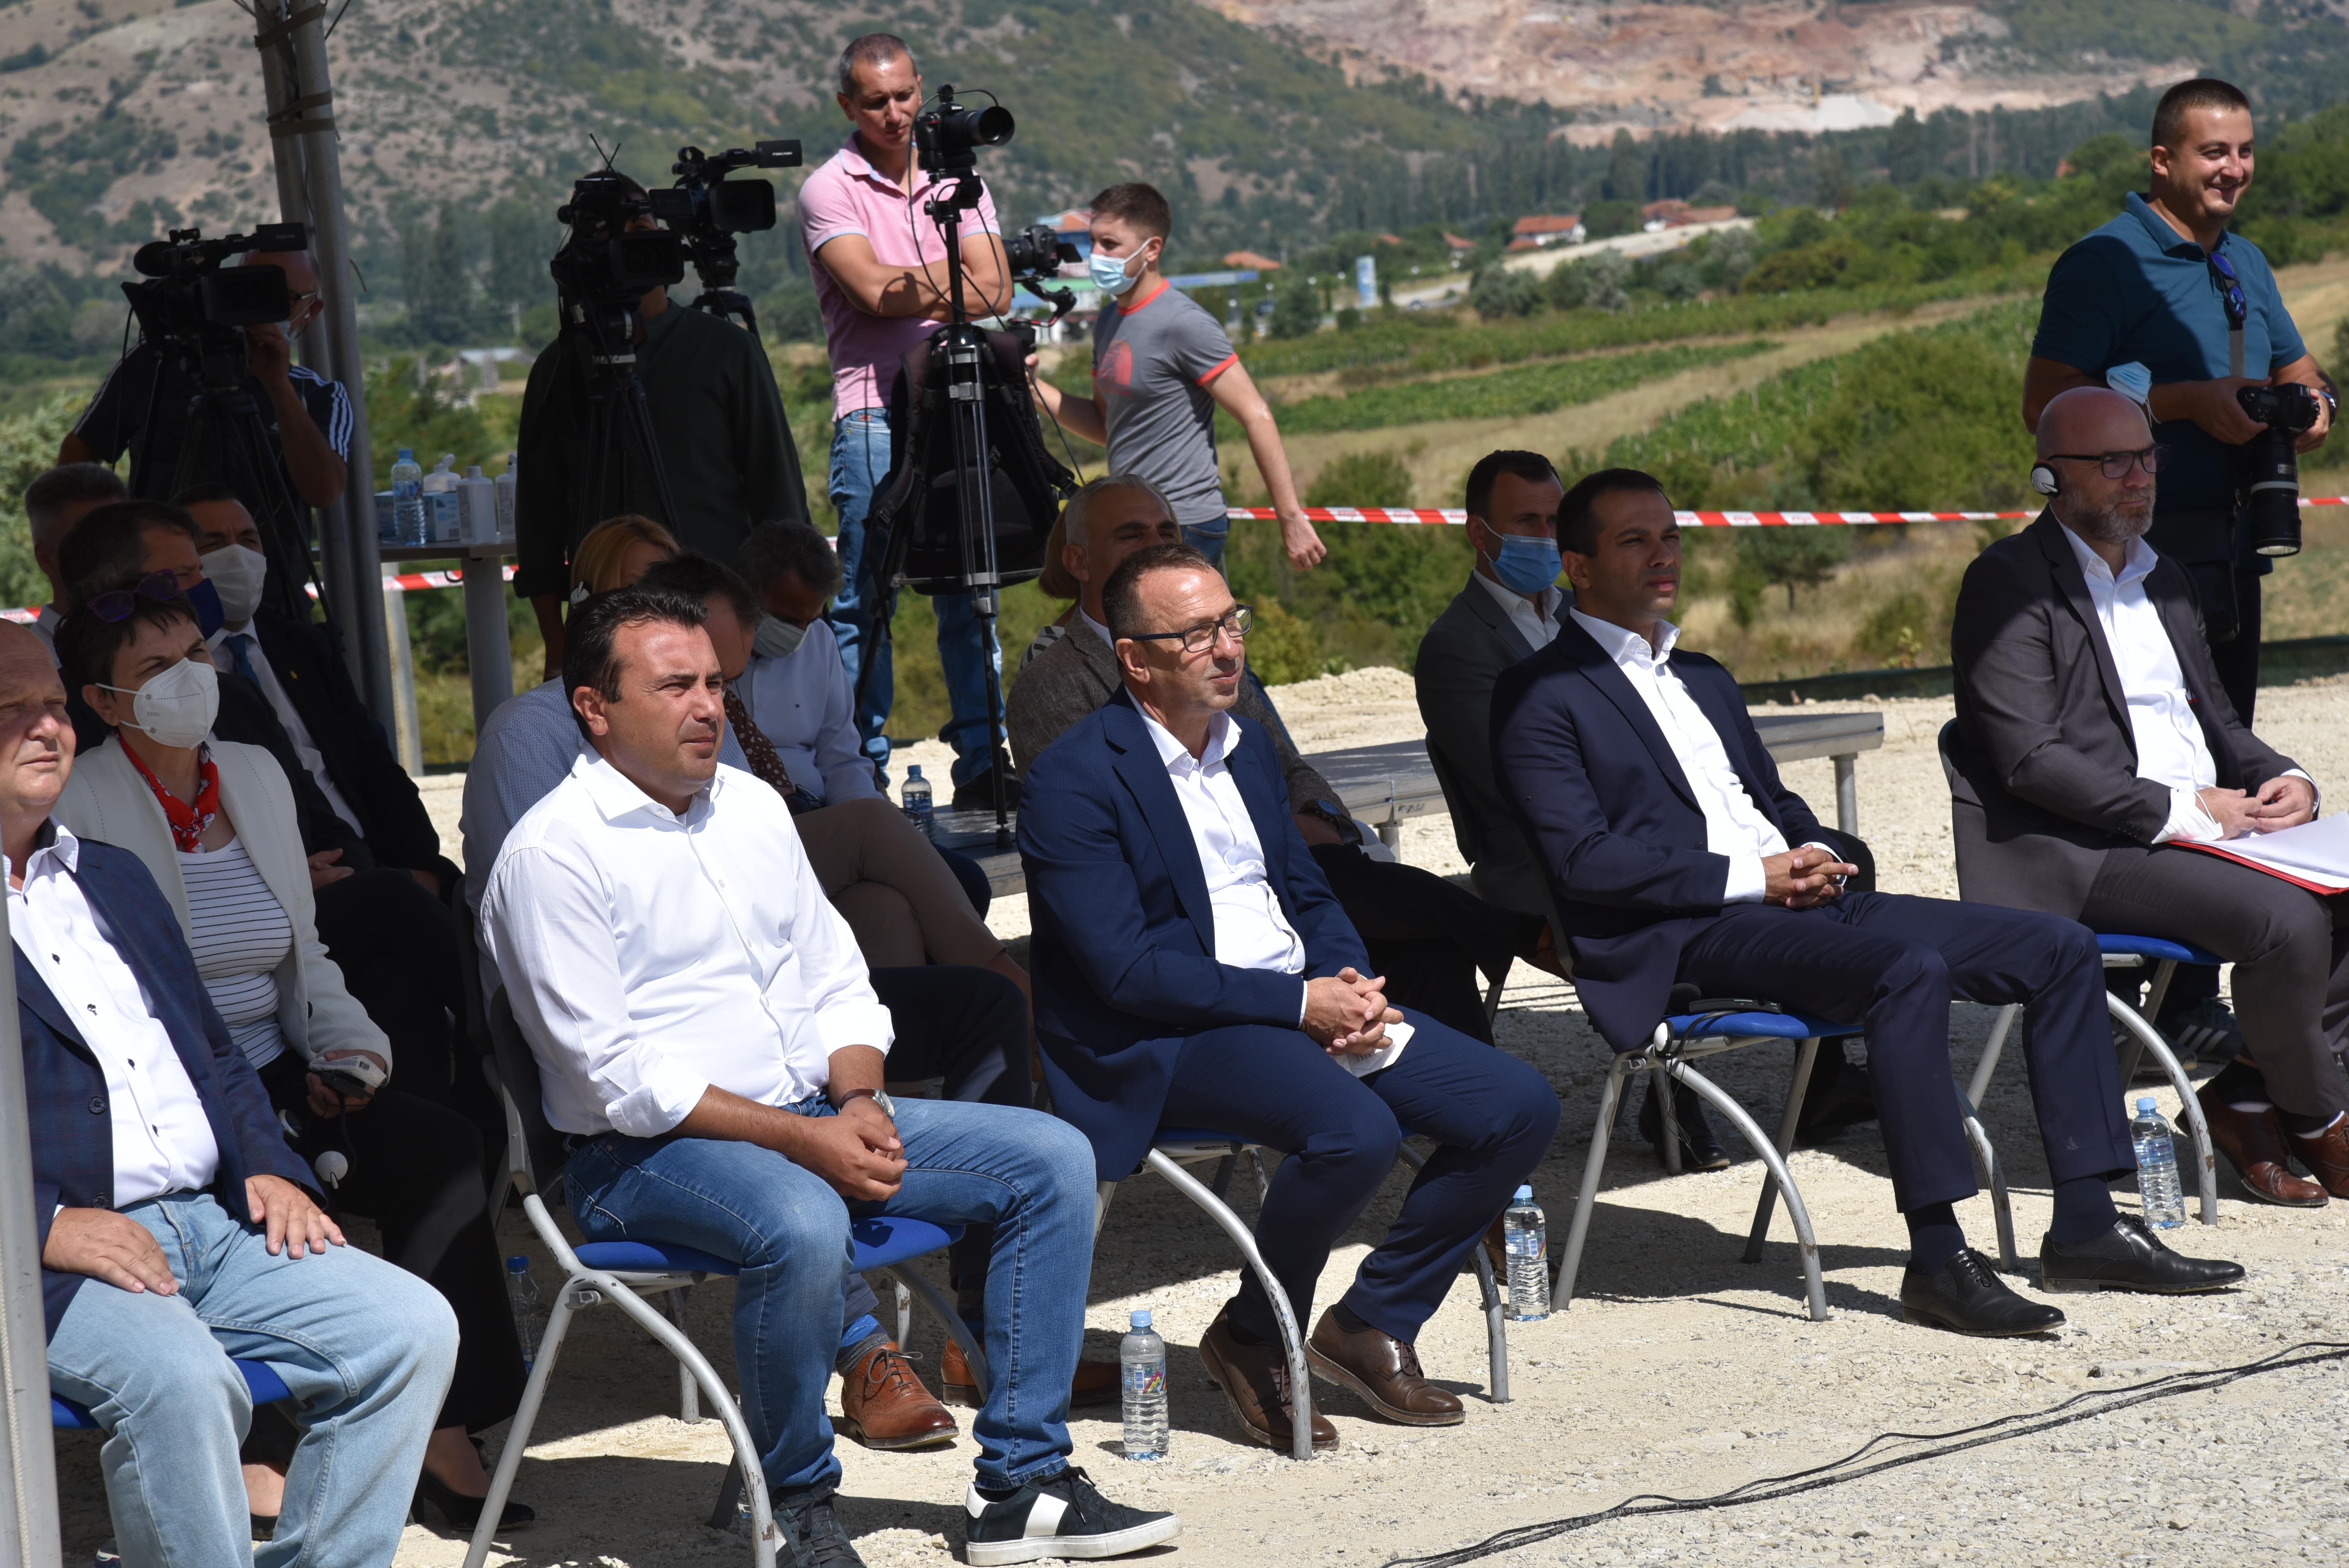 The realization of 400 kV interconnection Bitola – Elbasan has begun - The cornerstone for 400/110 kV SS Ohrid has been laid